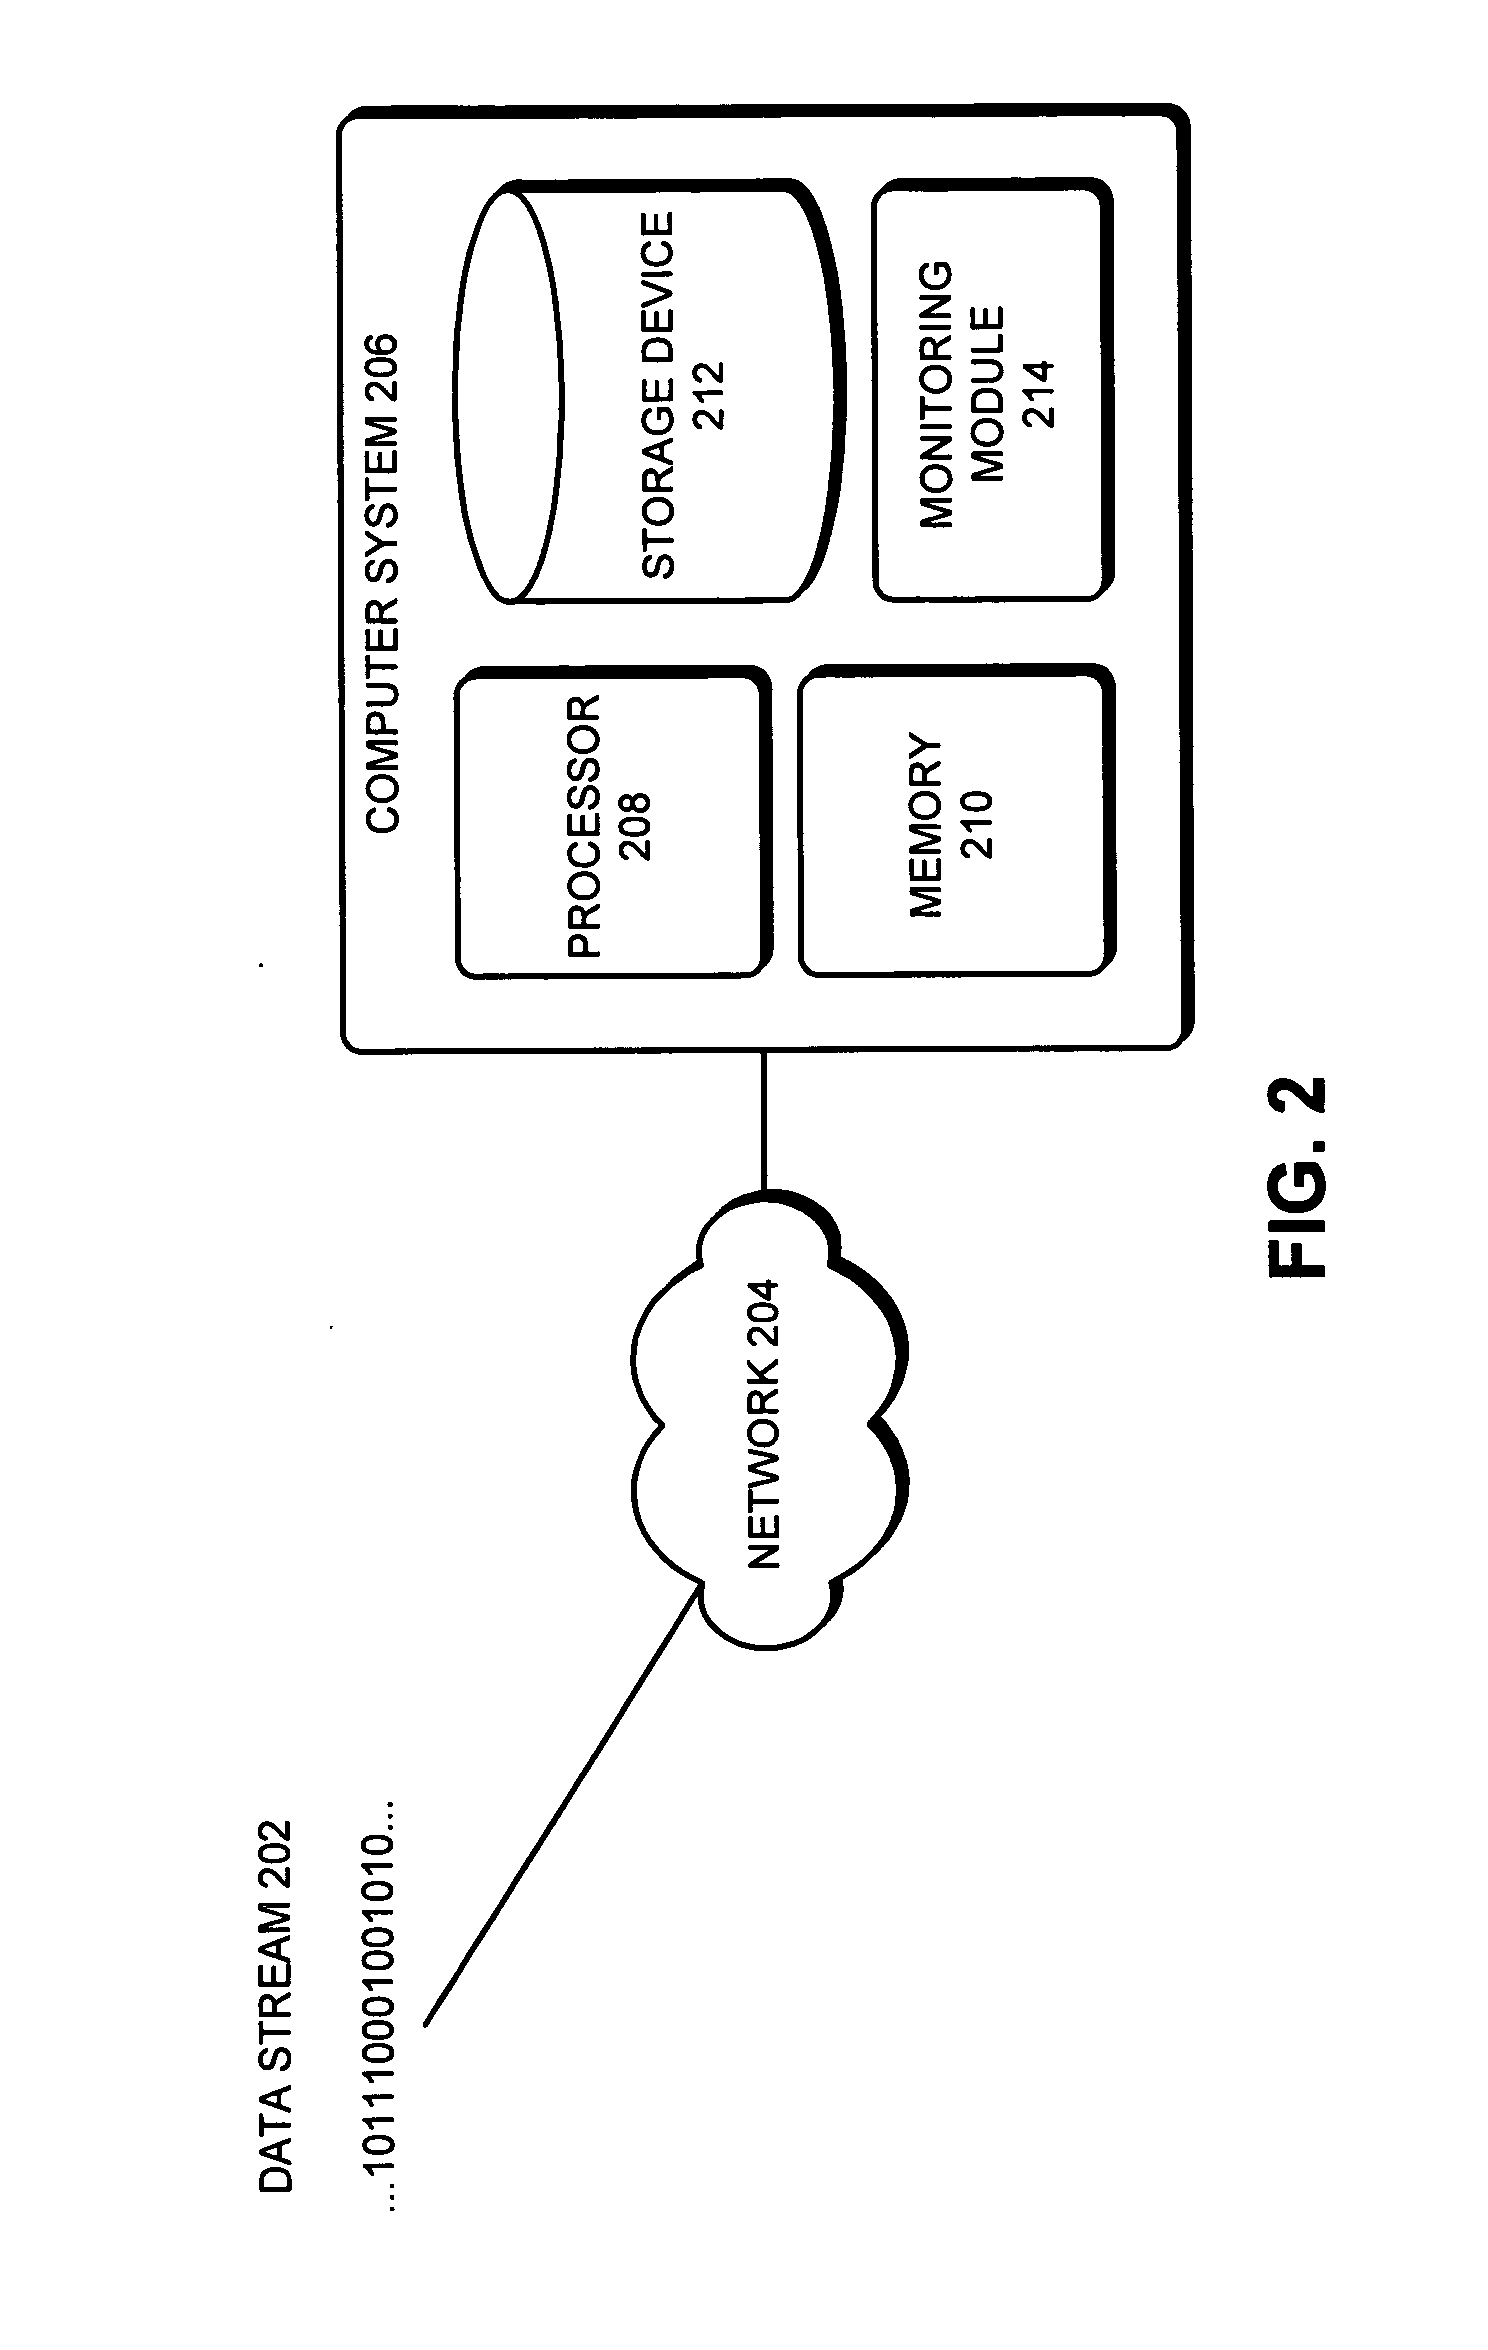 Method and apparatus for monitoring a data stream to detect a pattern of data elements